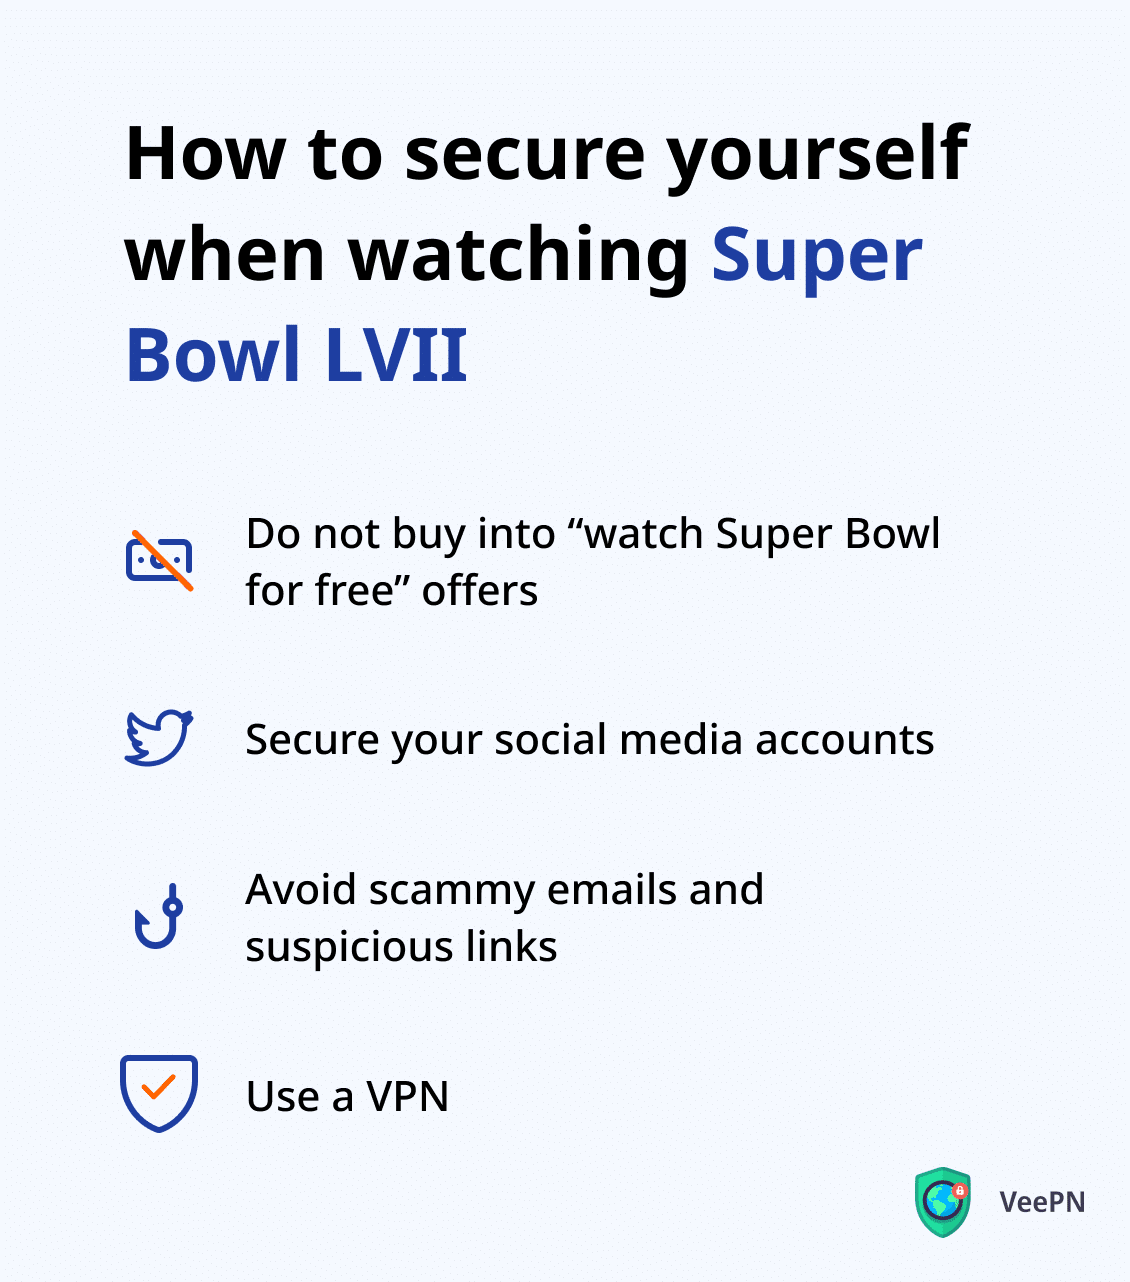 How to secure yourself when watching Super Bowl